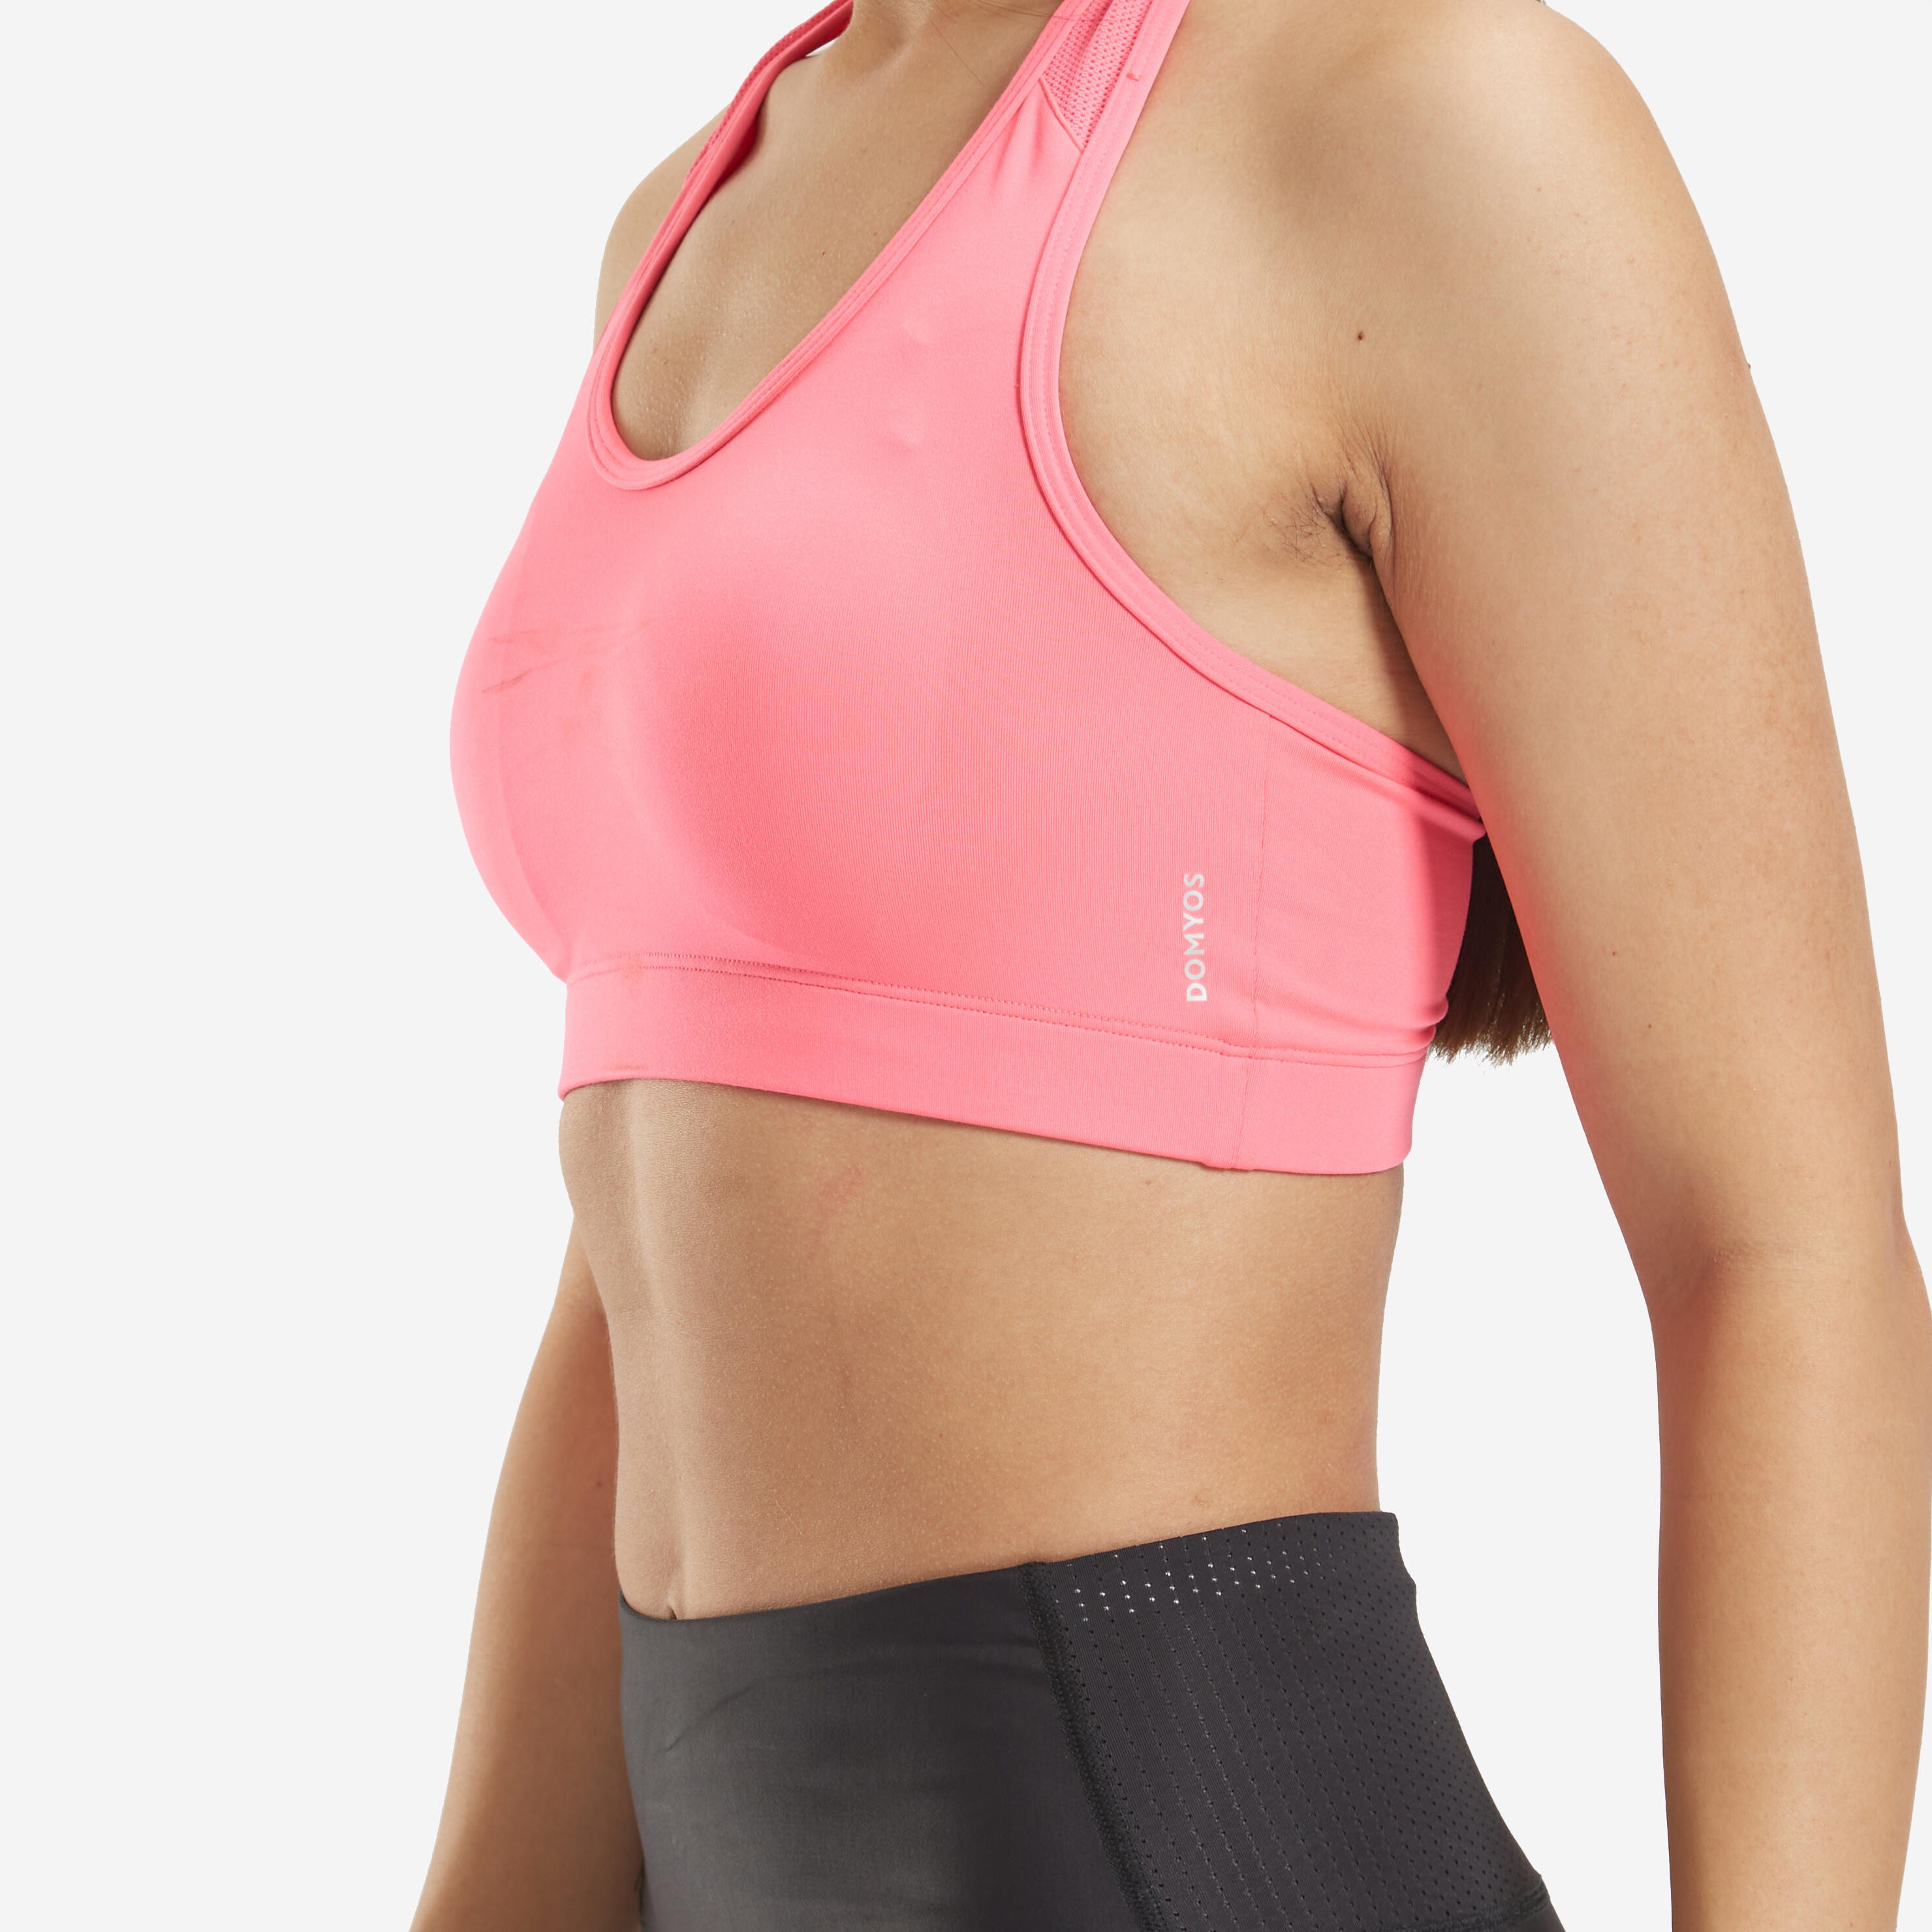 Domyos By Decathlon Black Moderate Support Cropped Fitness Sports Bra 540  Price in India, Full Specifications & Offers